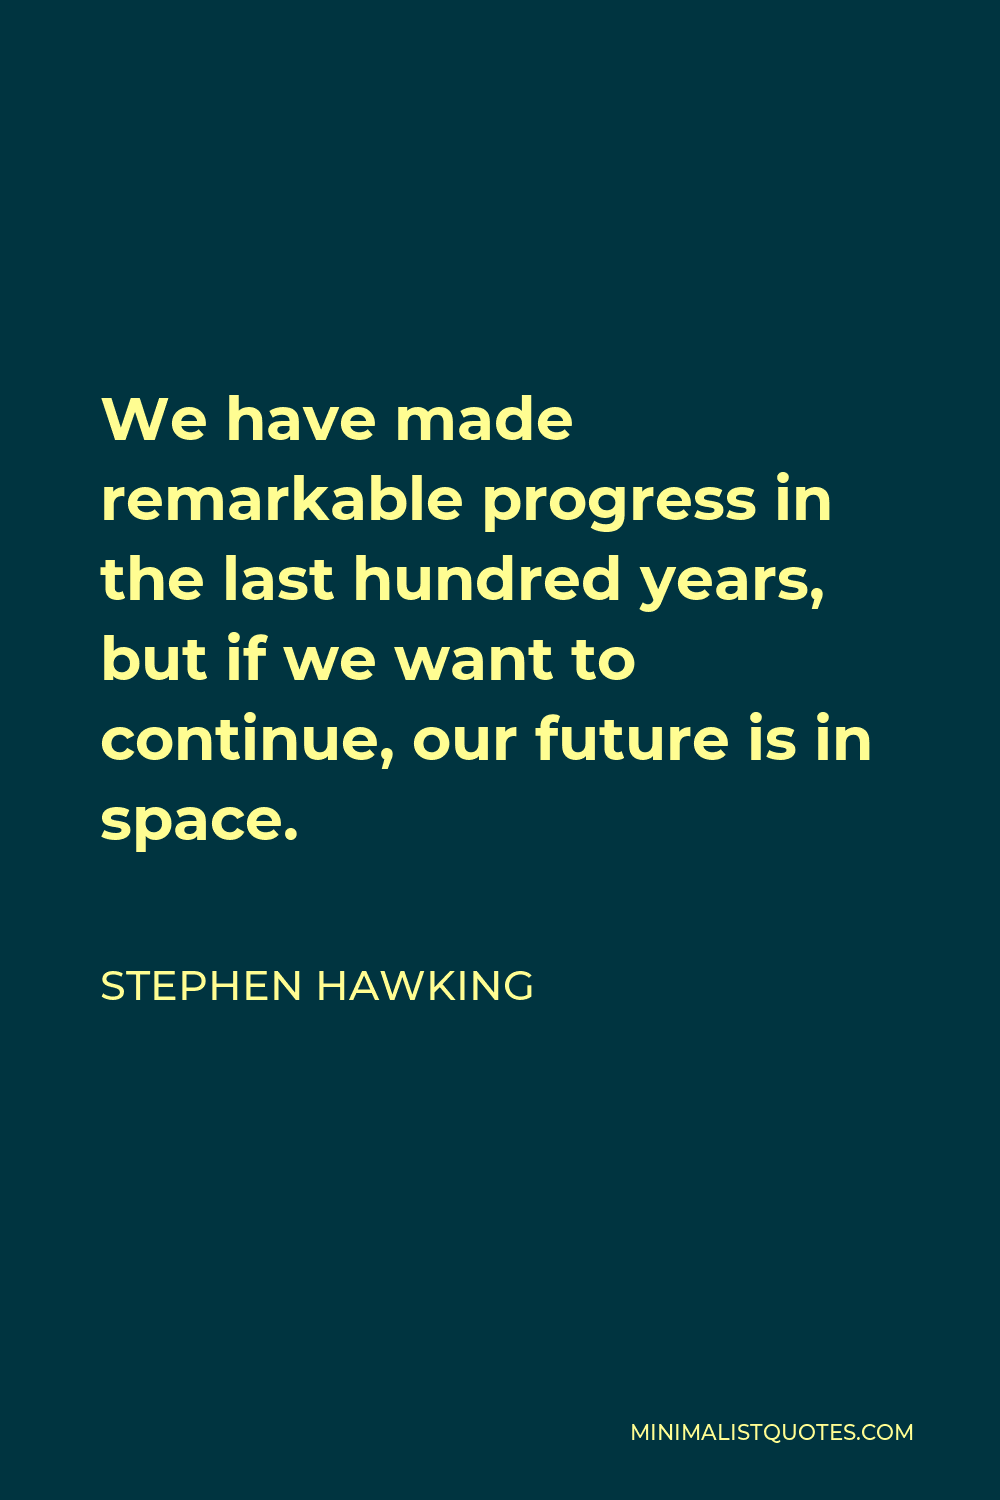 Stephen Hawking Quote - We have made remarkable progress in the last hundred years, but if we want to continue, our future is in space.